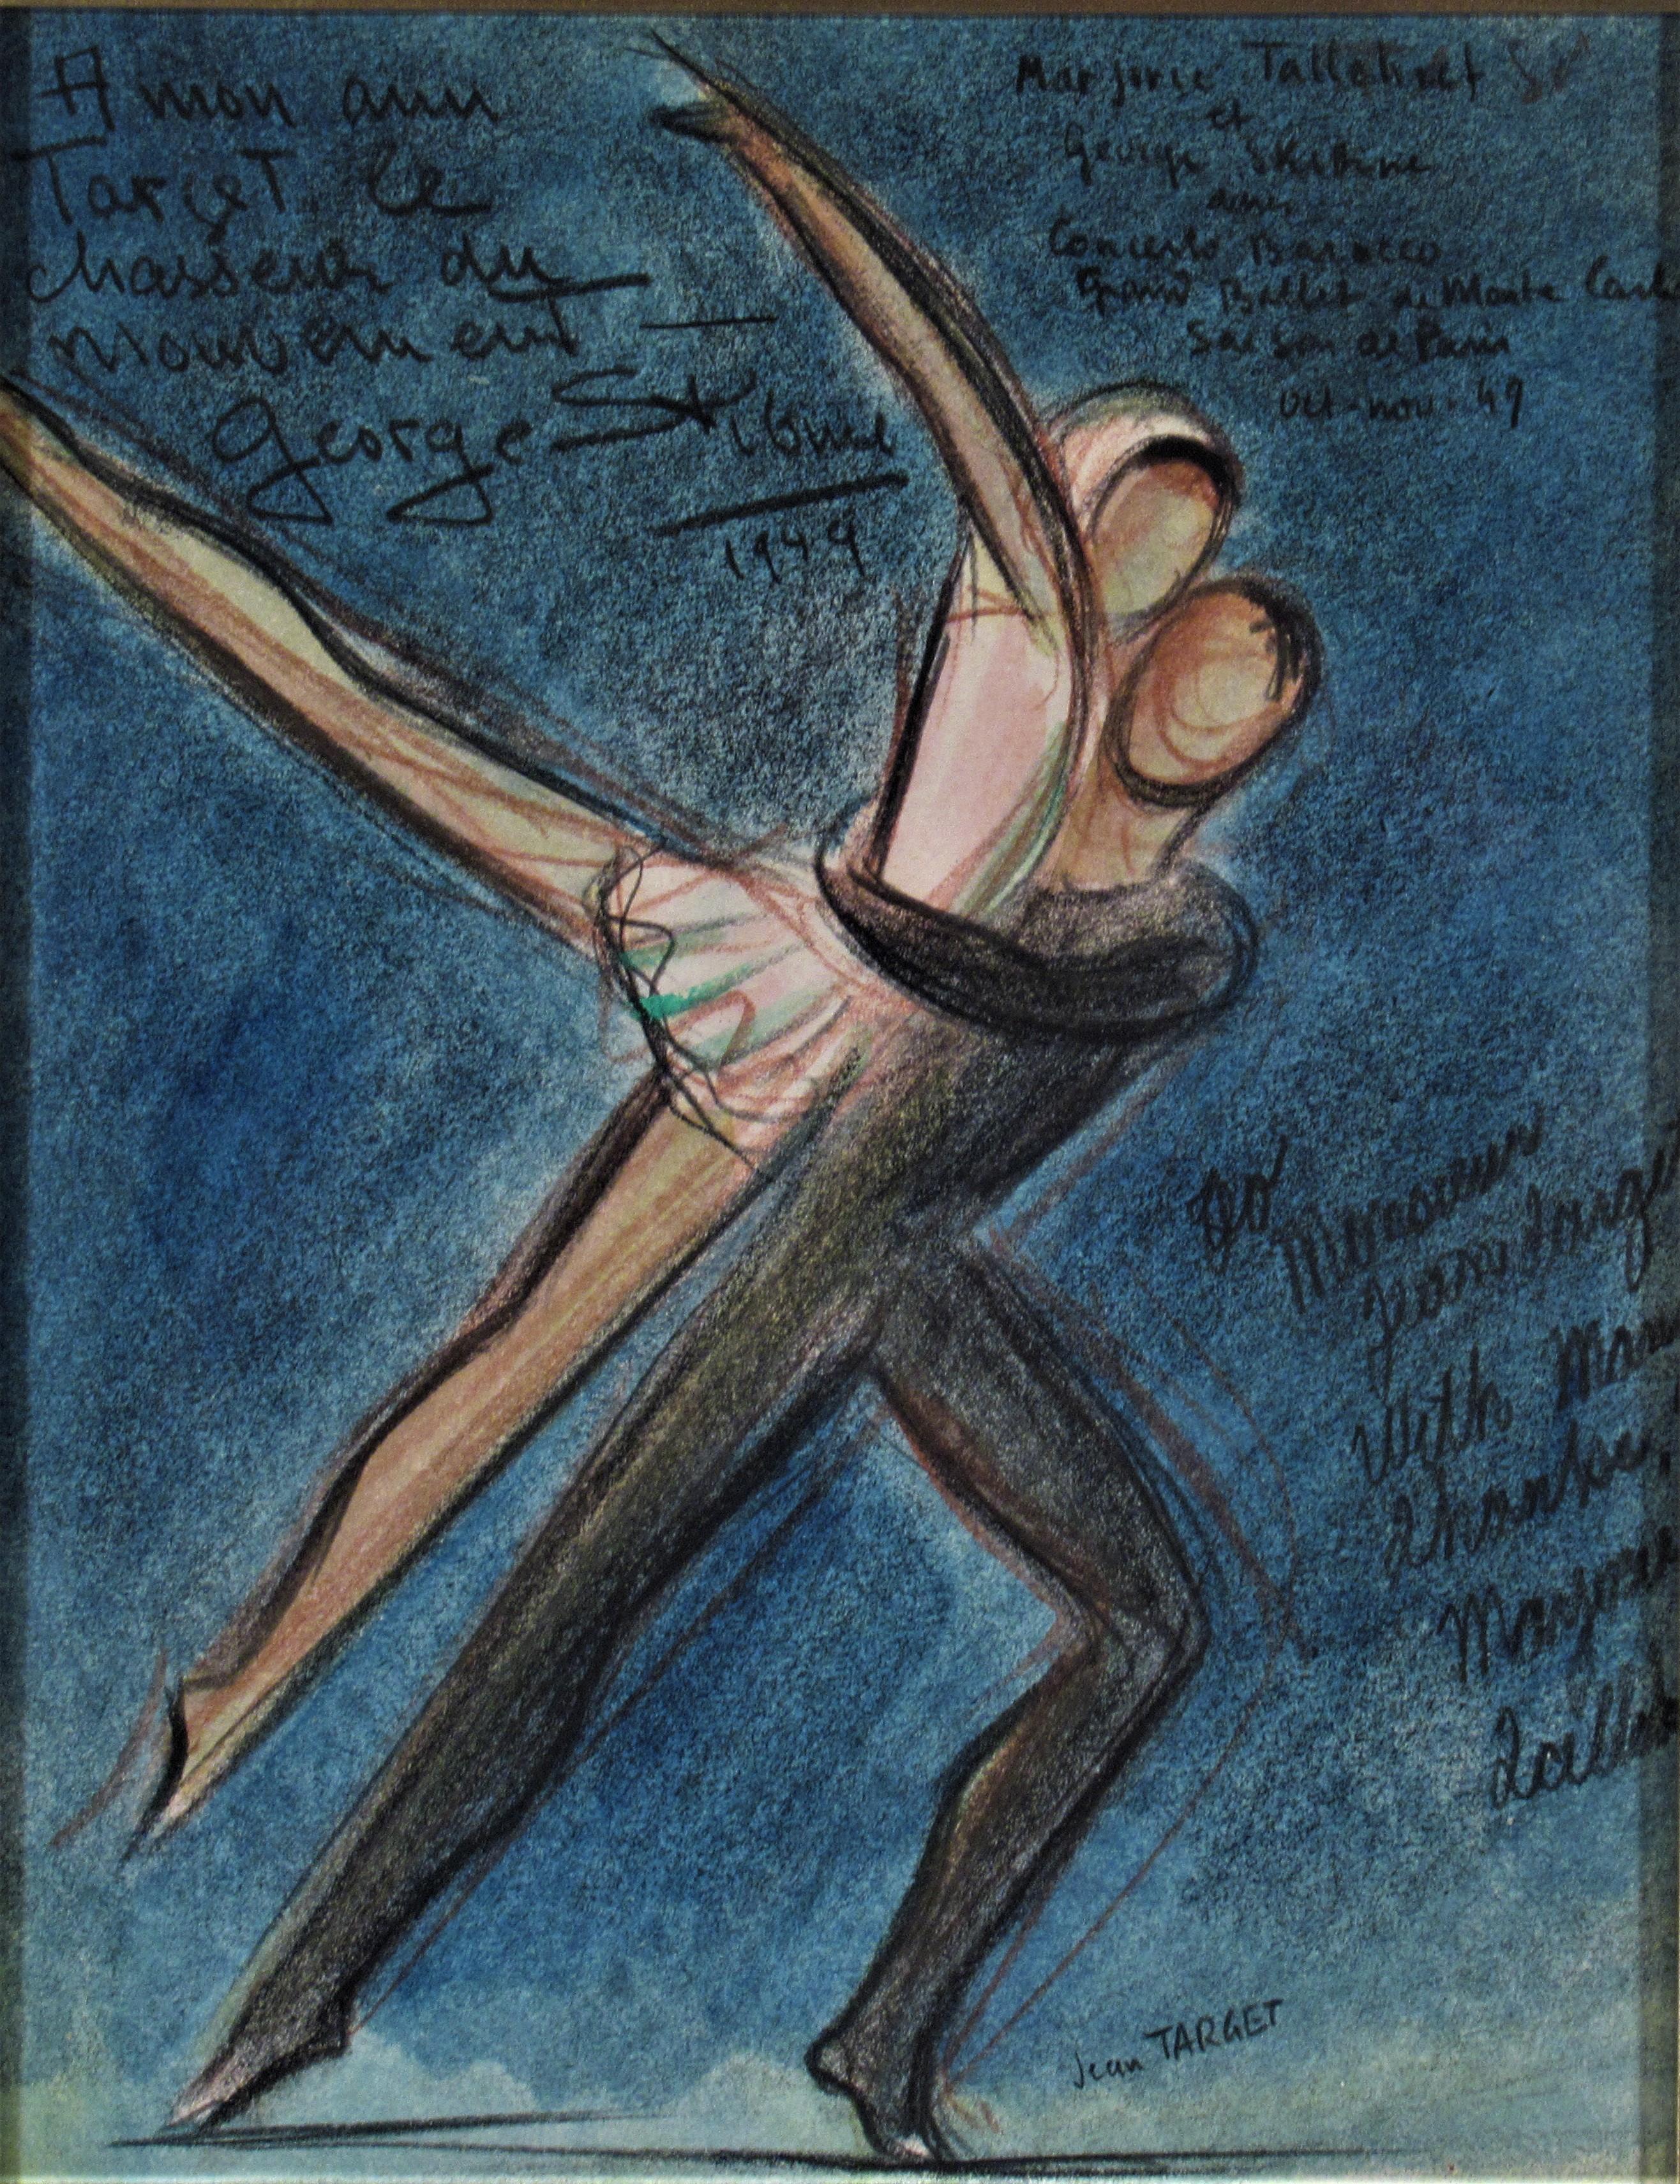 George Skibine and Marjorie Tallchief in Concerto Baracco - Art by Jean Target